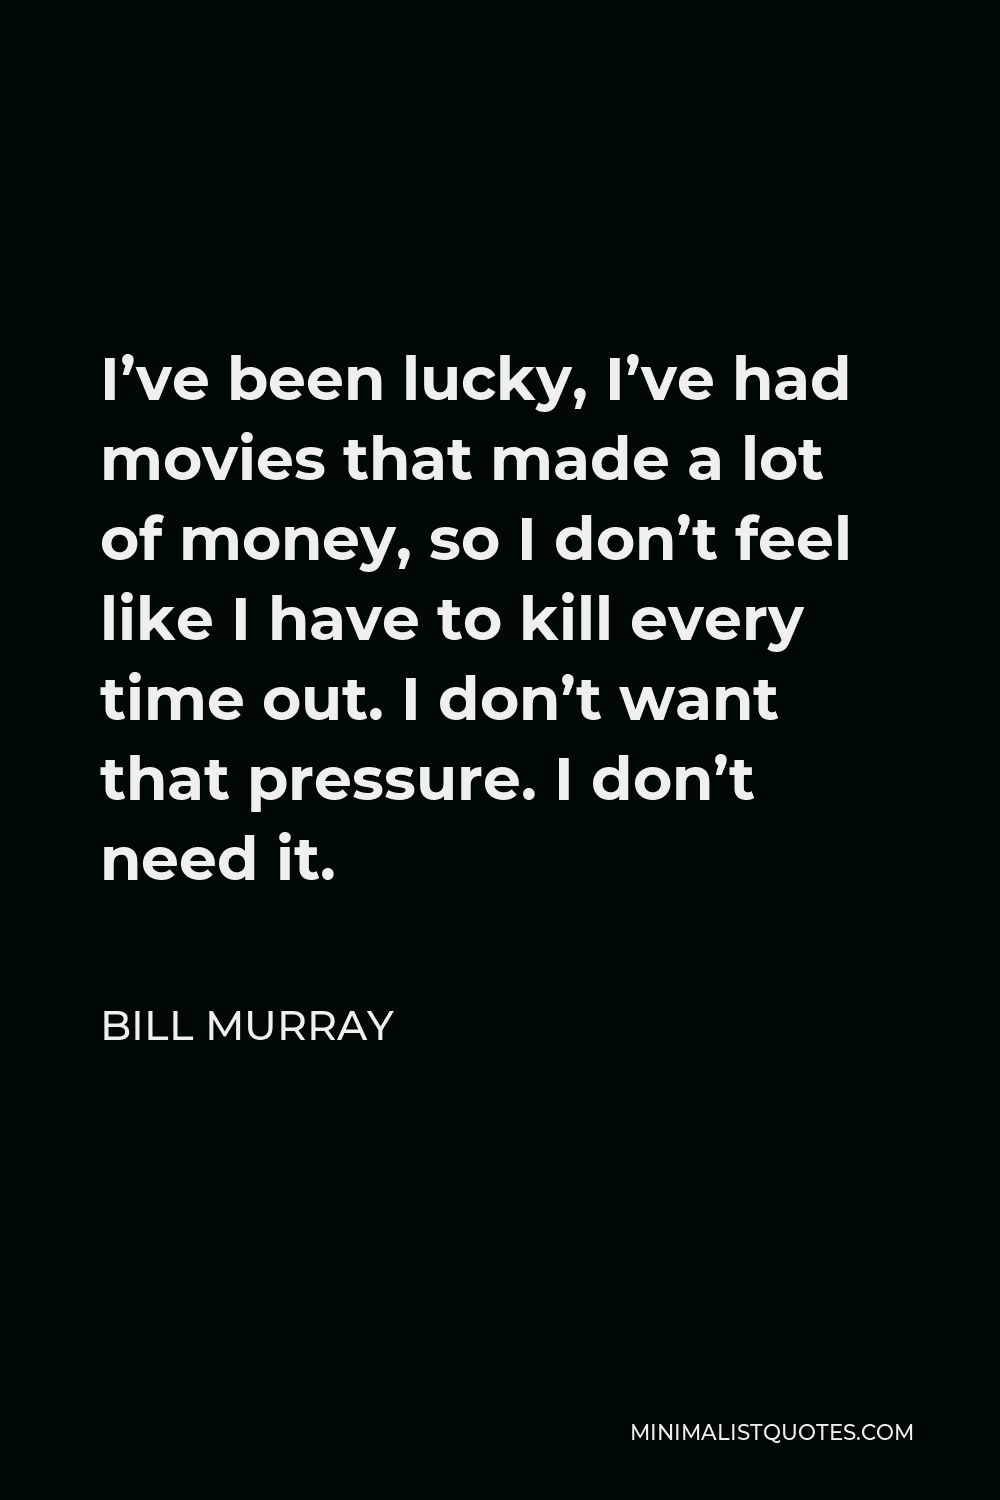 Bill Murray Quote - I’ve been lucky, I’ve had movies that made a lot of money, so I don’t feel like I have to kill every time out. I don’t want that pressure. I don’t need it.